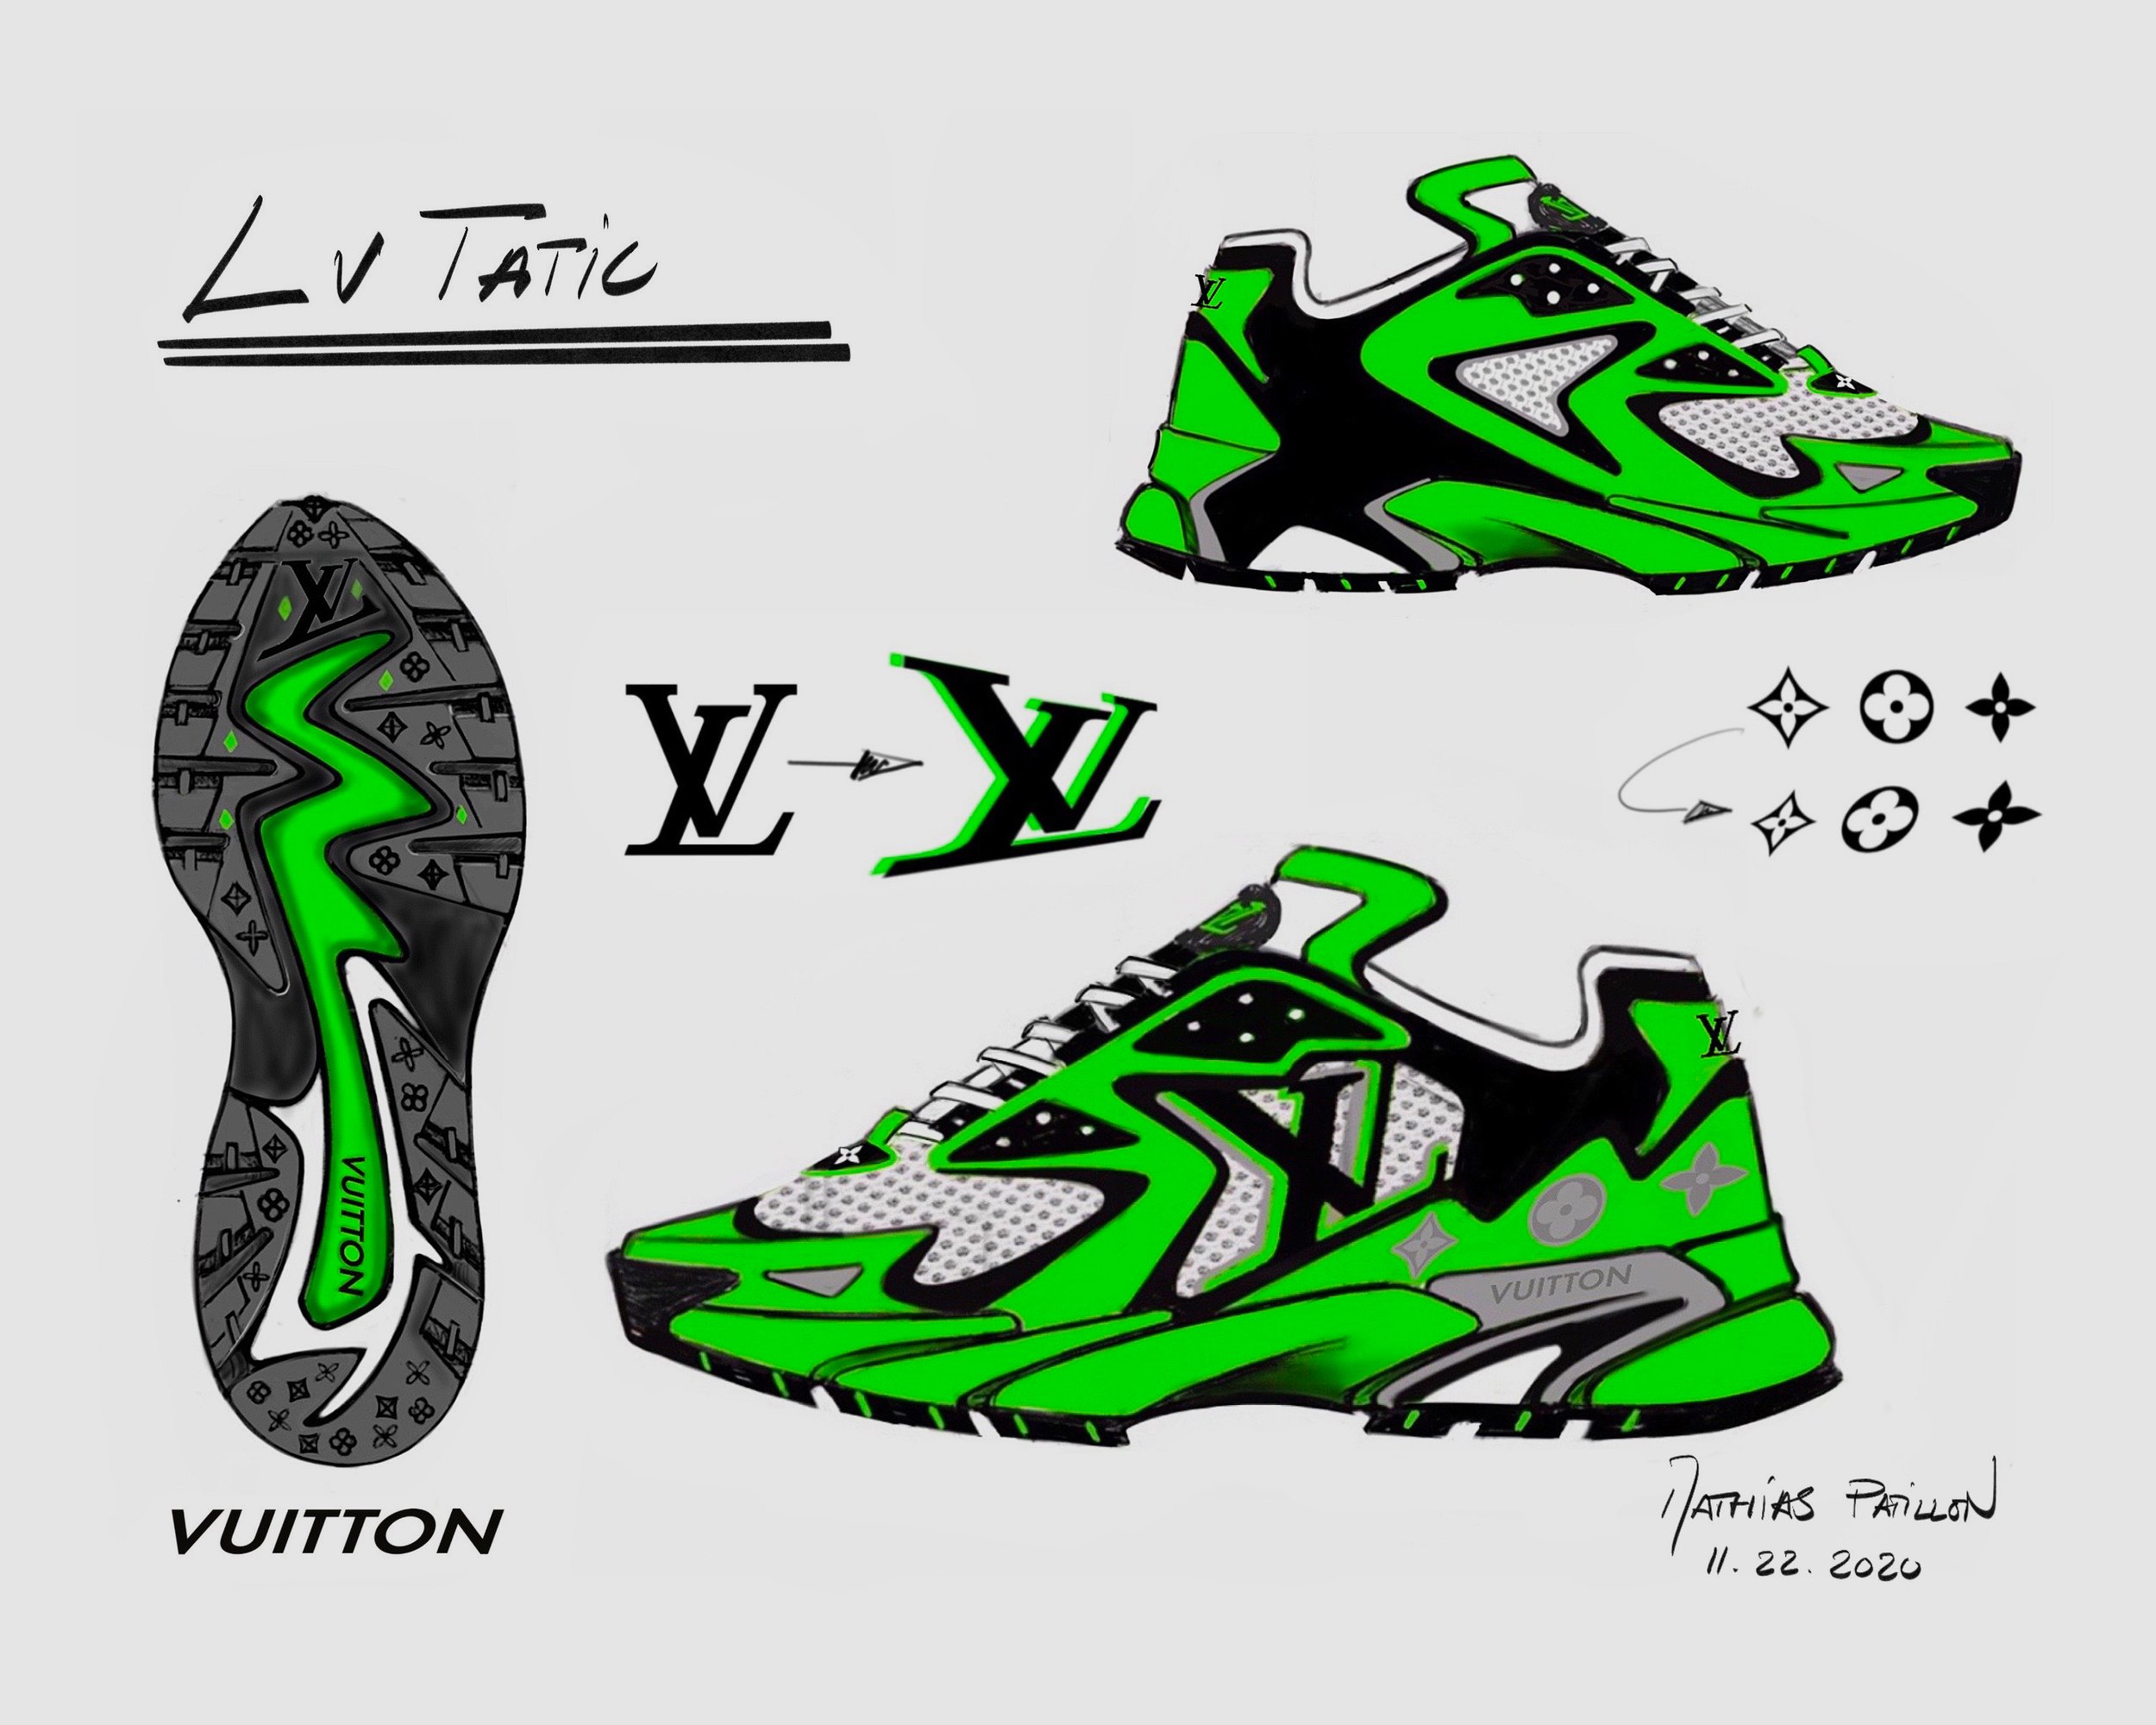 Virgil Abloh's Formula for Louis Vuitton Is Already Working